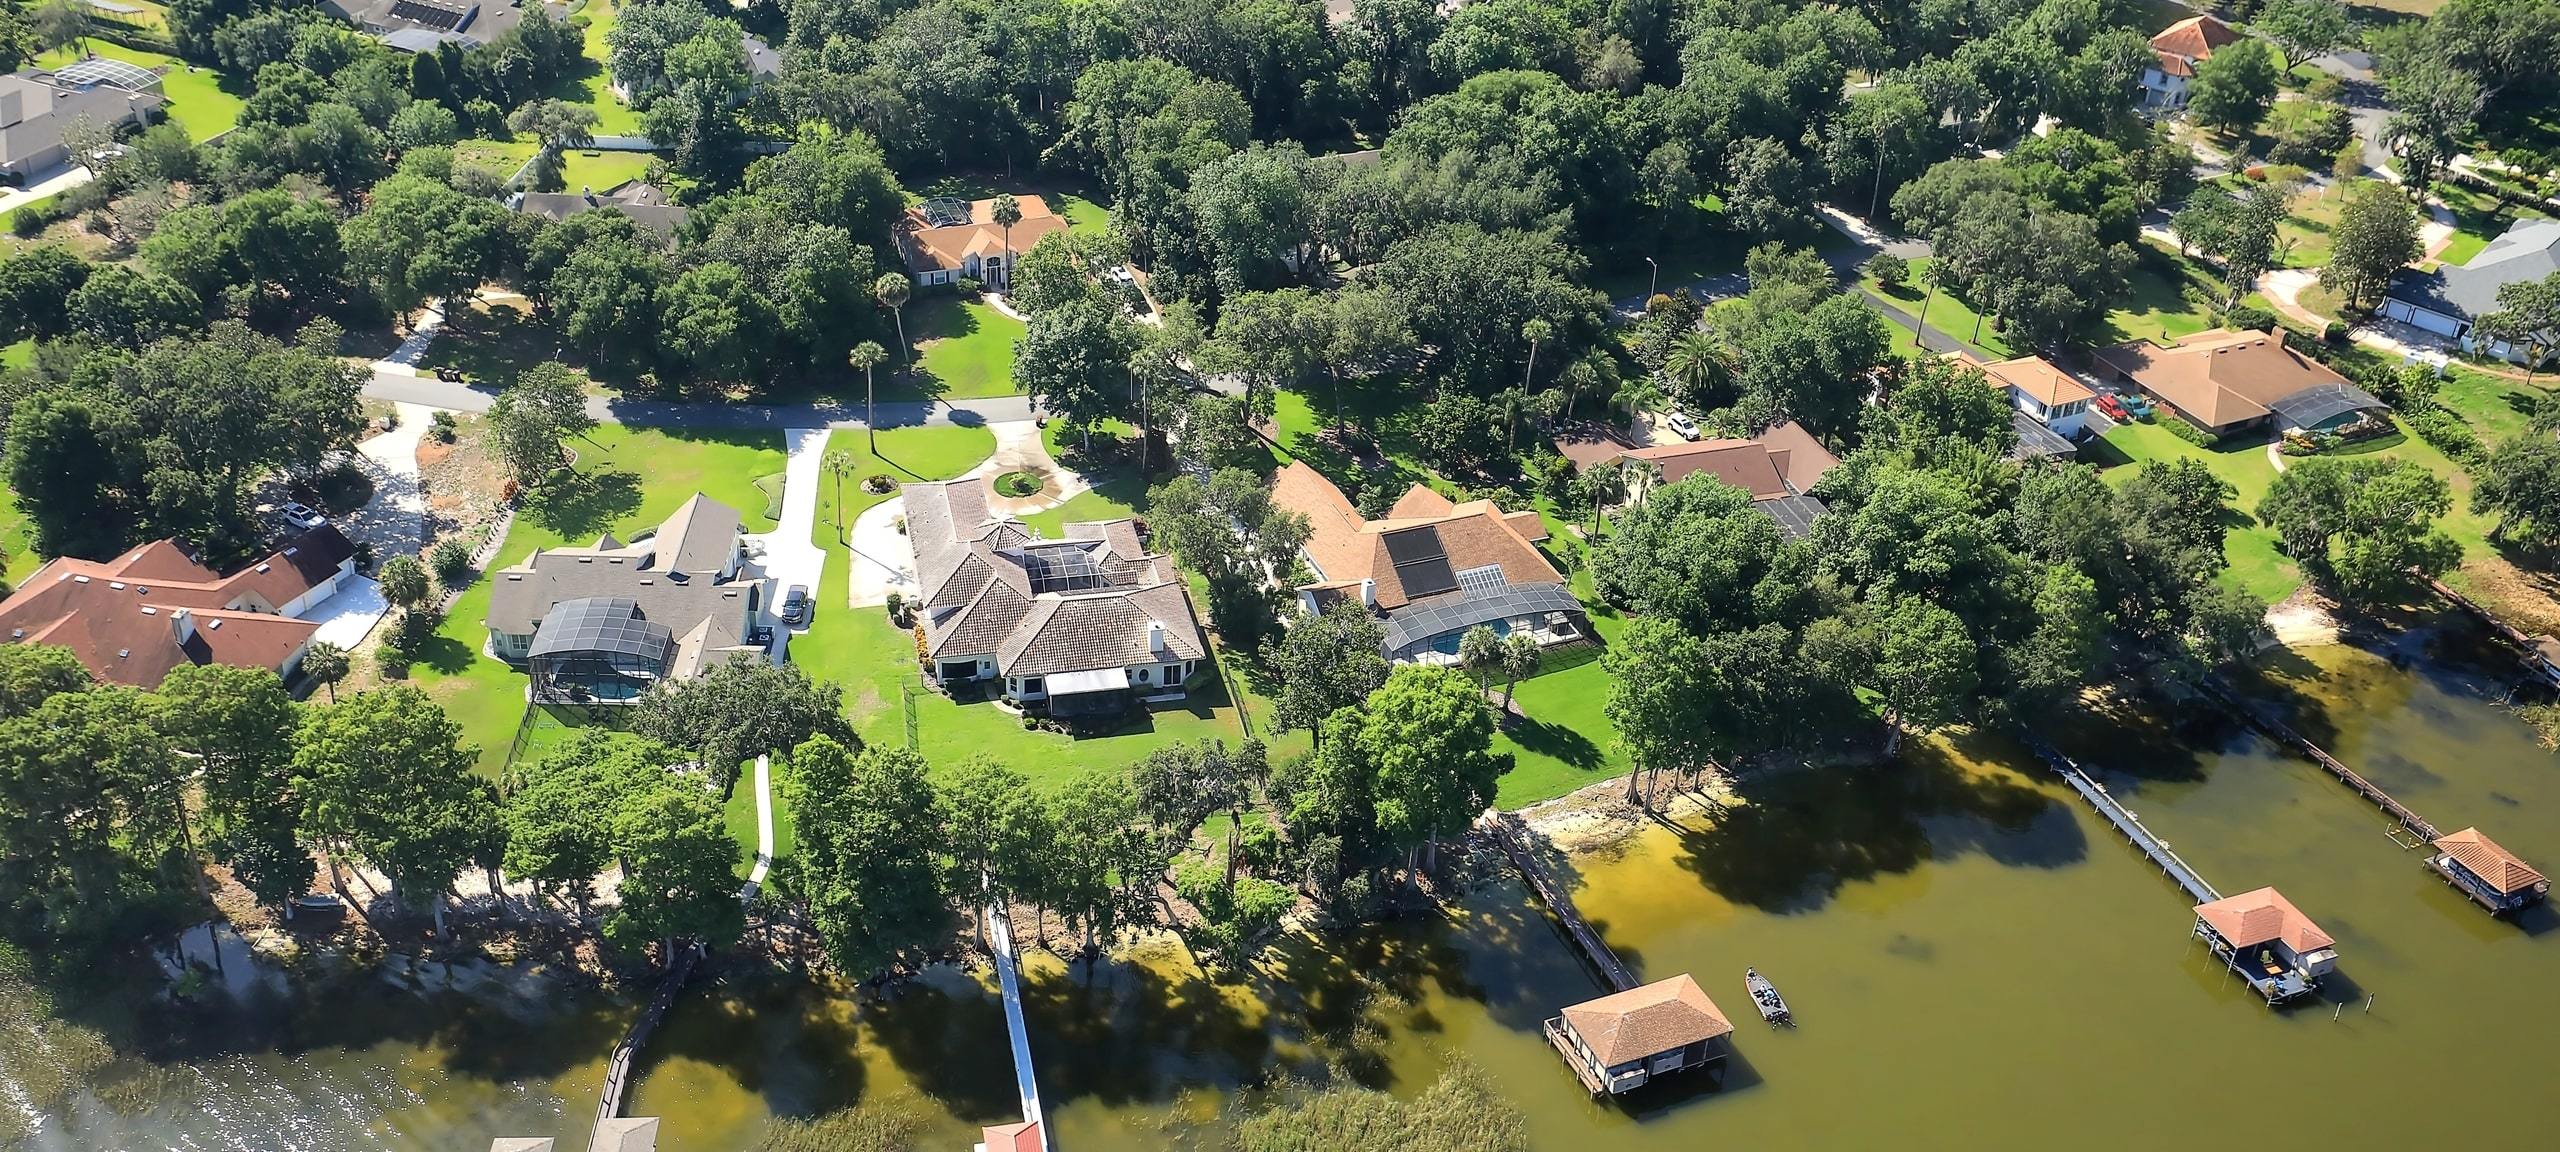 Aerial view over Mount Dora waterfront neighborhood, with private docks attached to homes